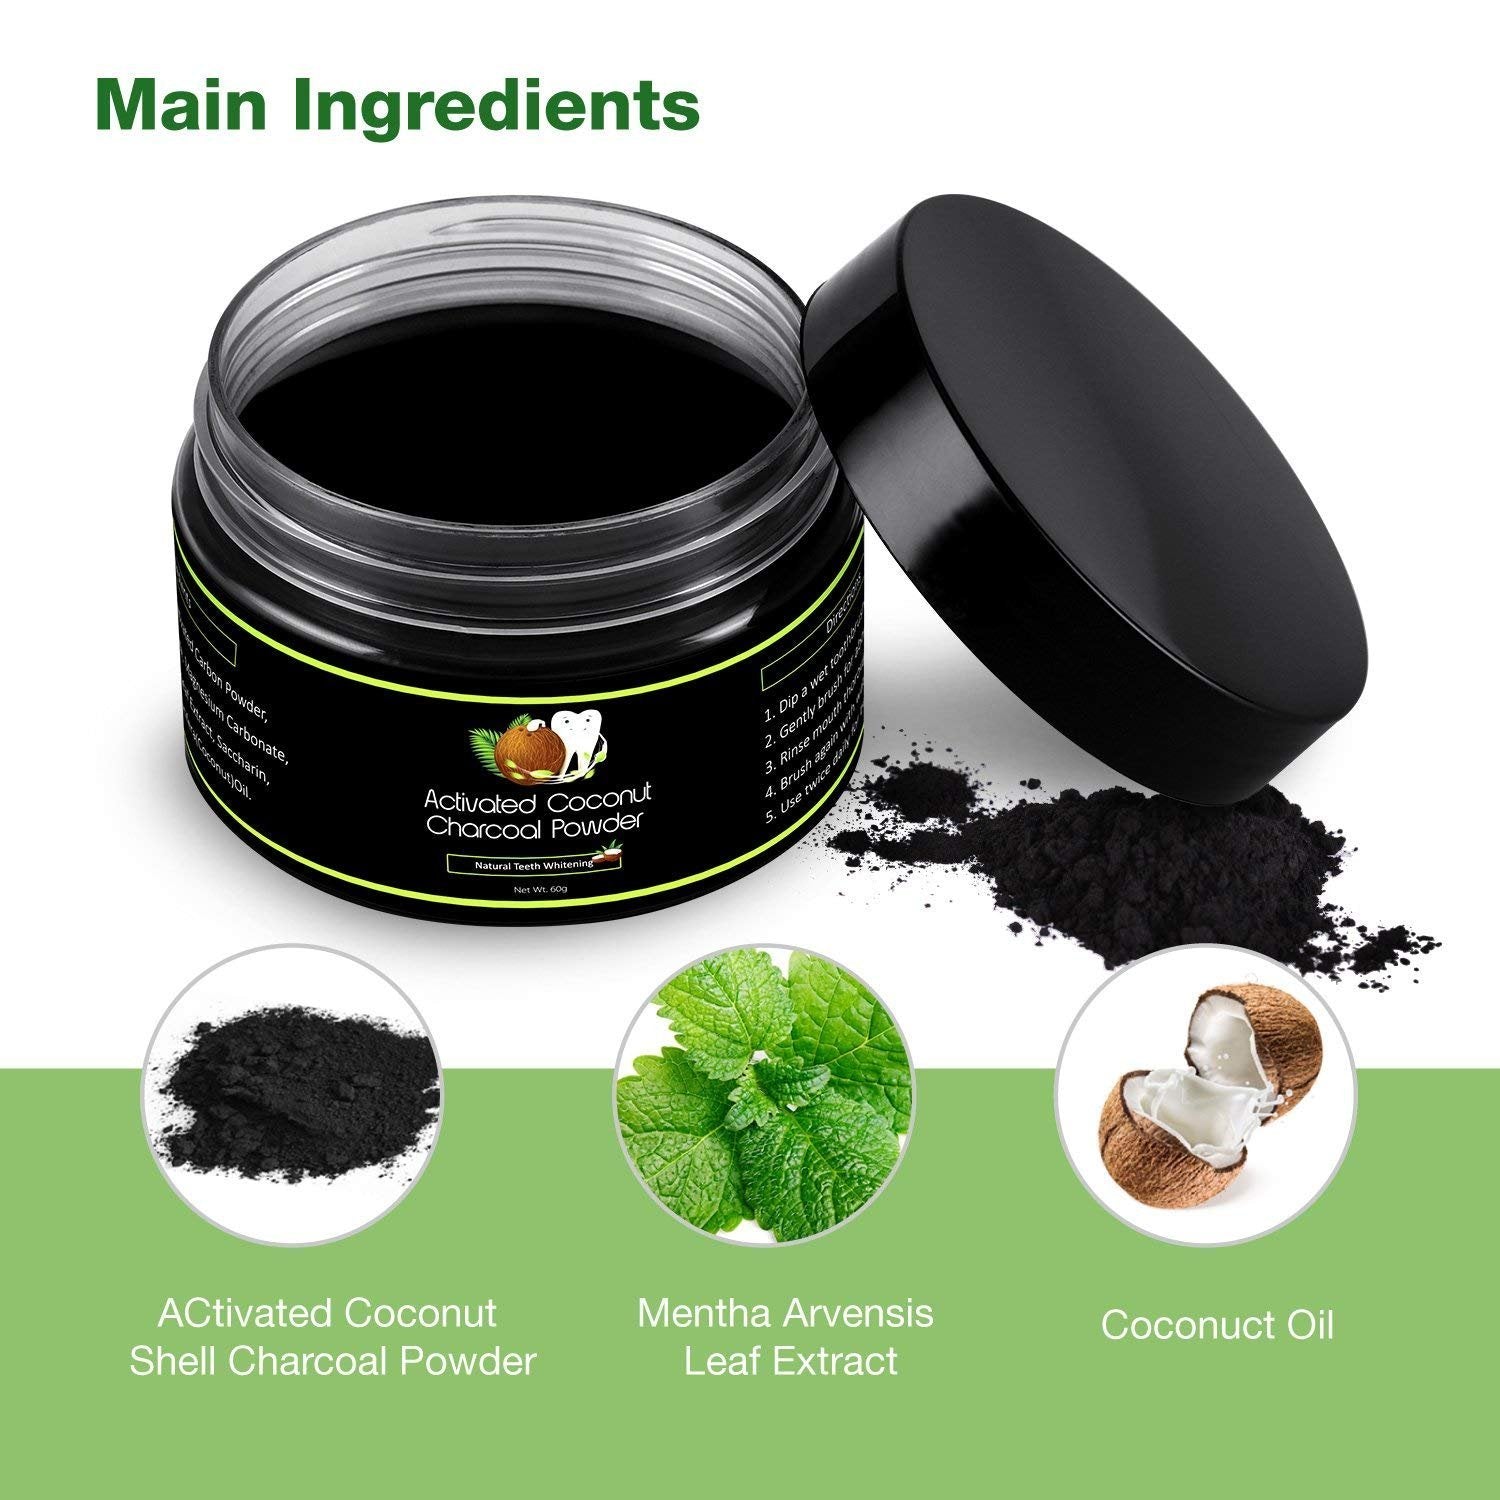 ProNoir Activated Charcoal Natural Teeth Whitening Powder Kit Wintermint Flavour by Fiery Youth - Organic Coconut Charcoal Powder, Removes Coffee Cigarette Stains, Works Well with Toothpaste